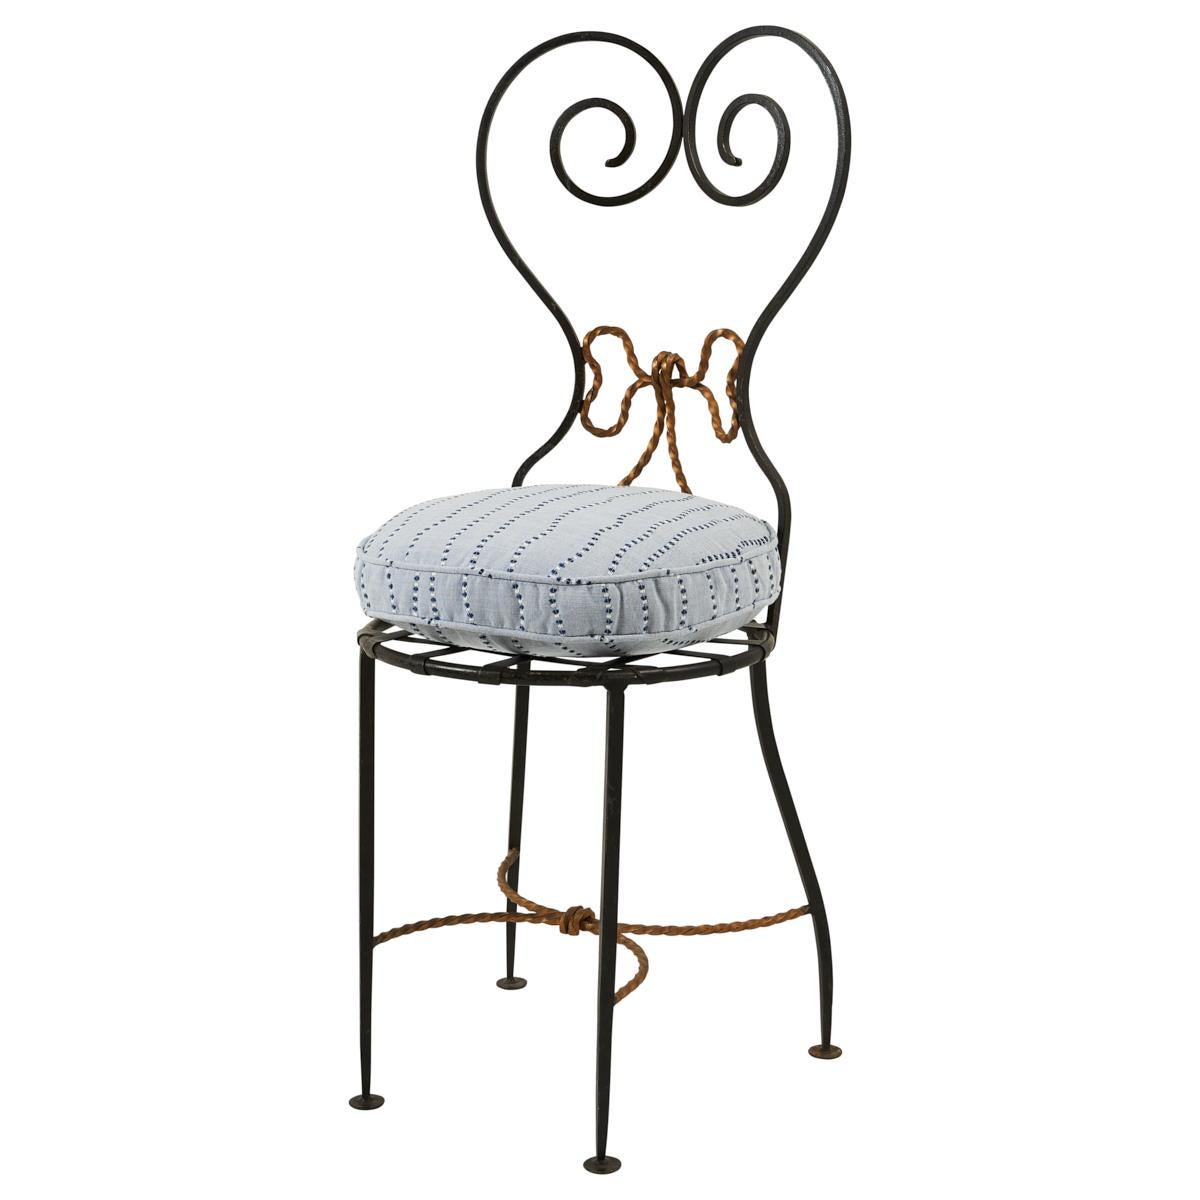 Wonderful vintage finds from France, these classic iron garden chairs are made all the more lovely by the charming bow detail on the back. Perfect on a terrace or at a breakfast table for two, this pair has wonderful flair.
 